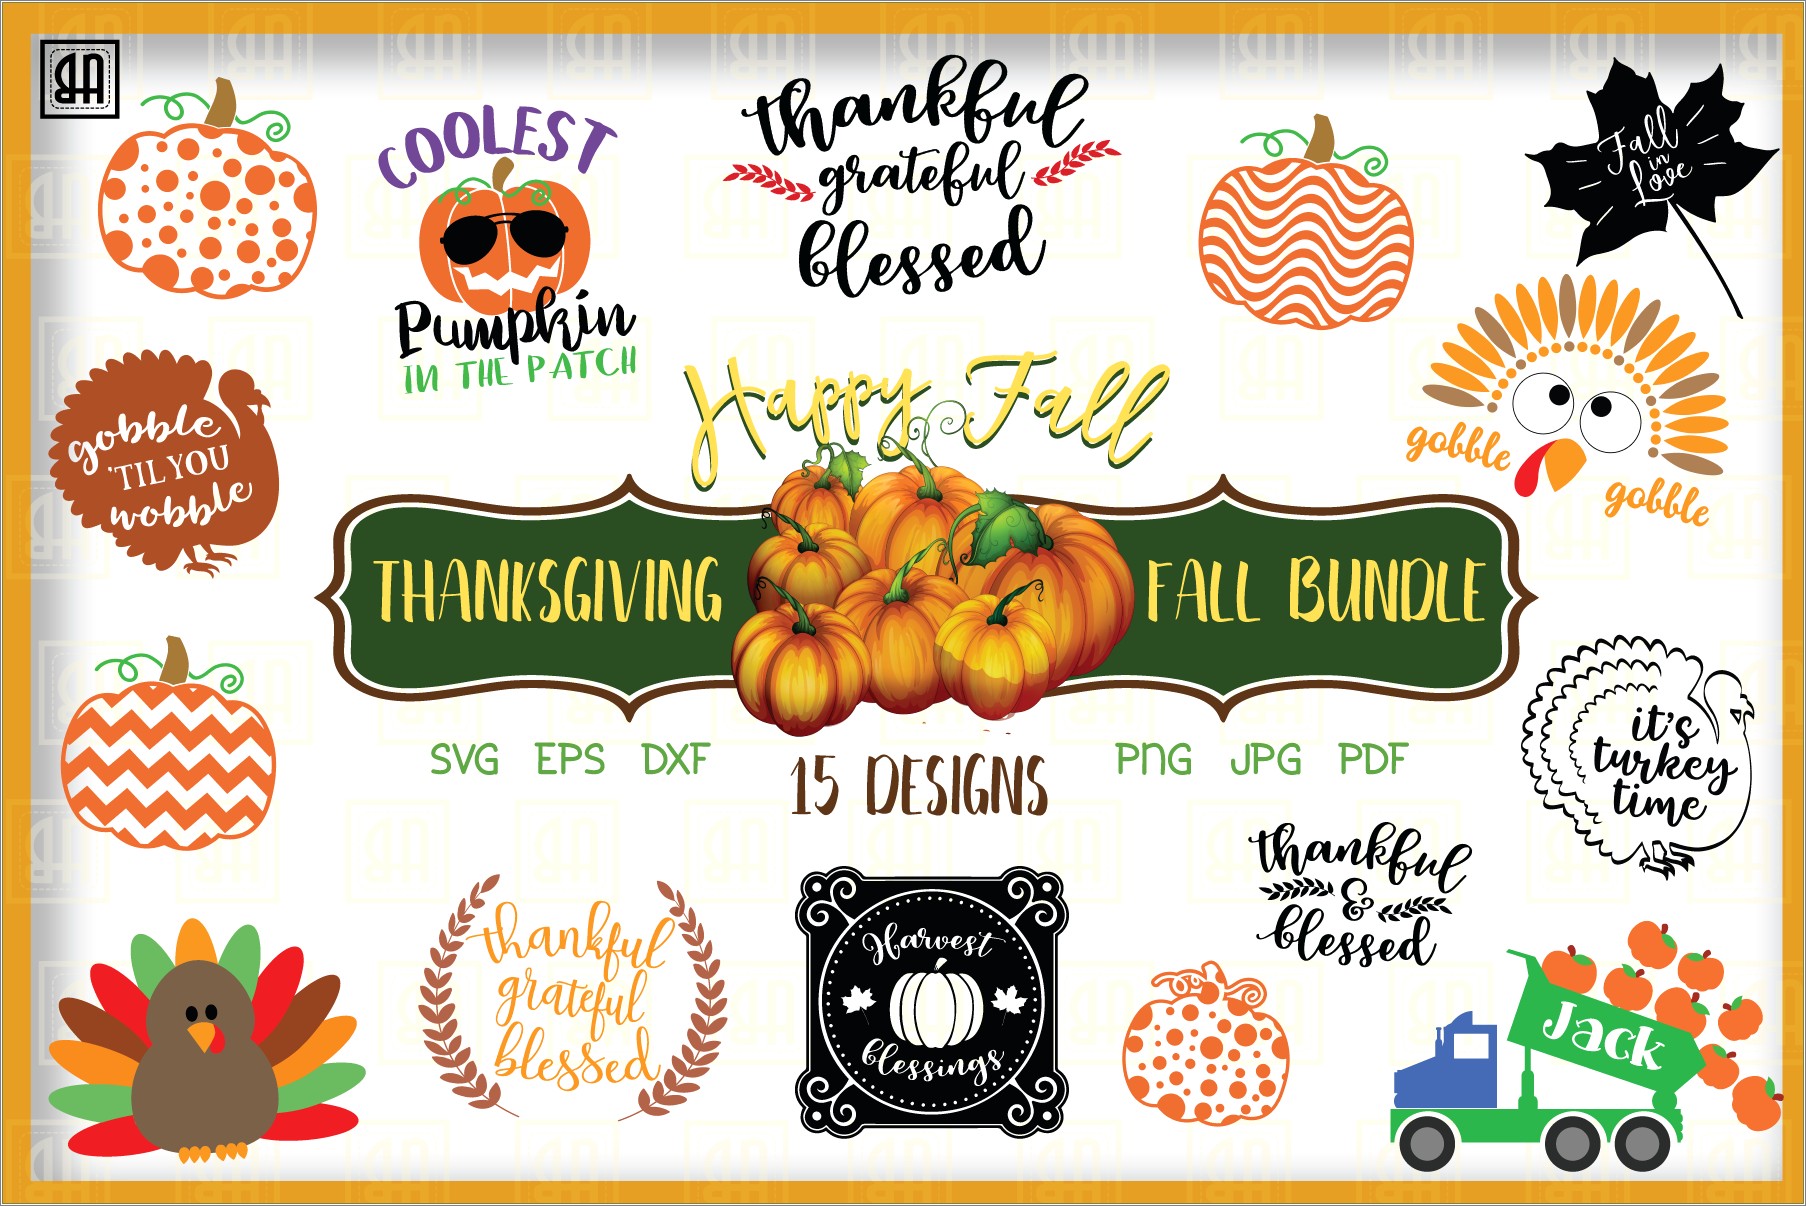 Corel Draw Free Templates For Thanksgiving